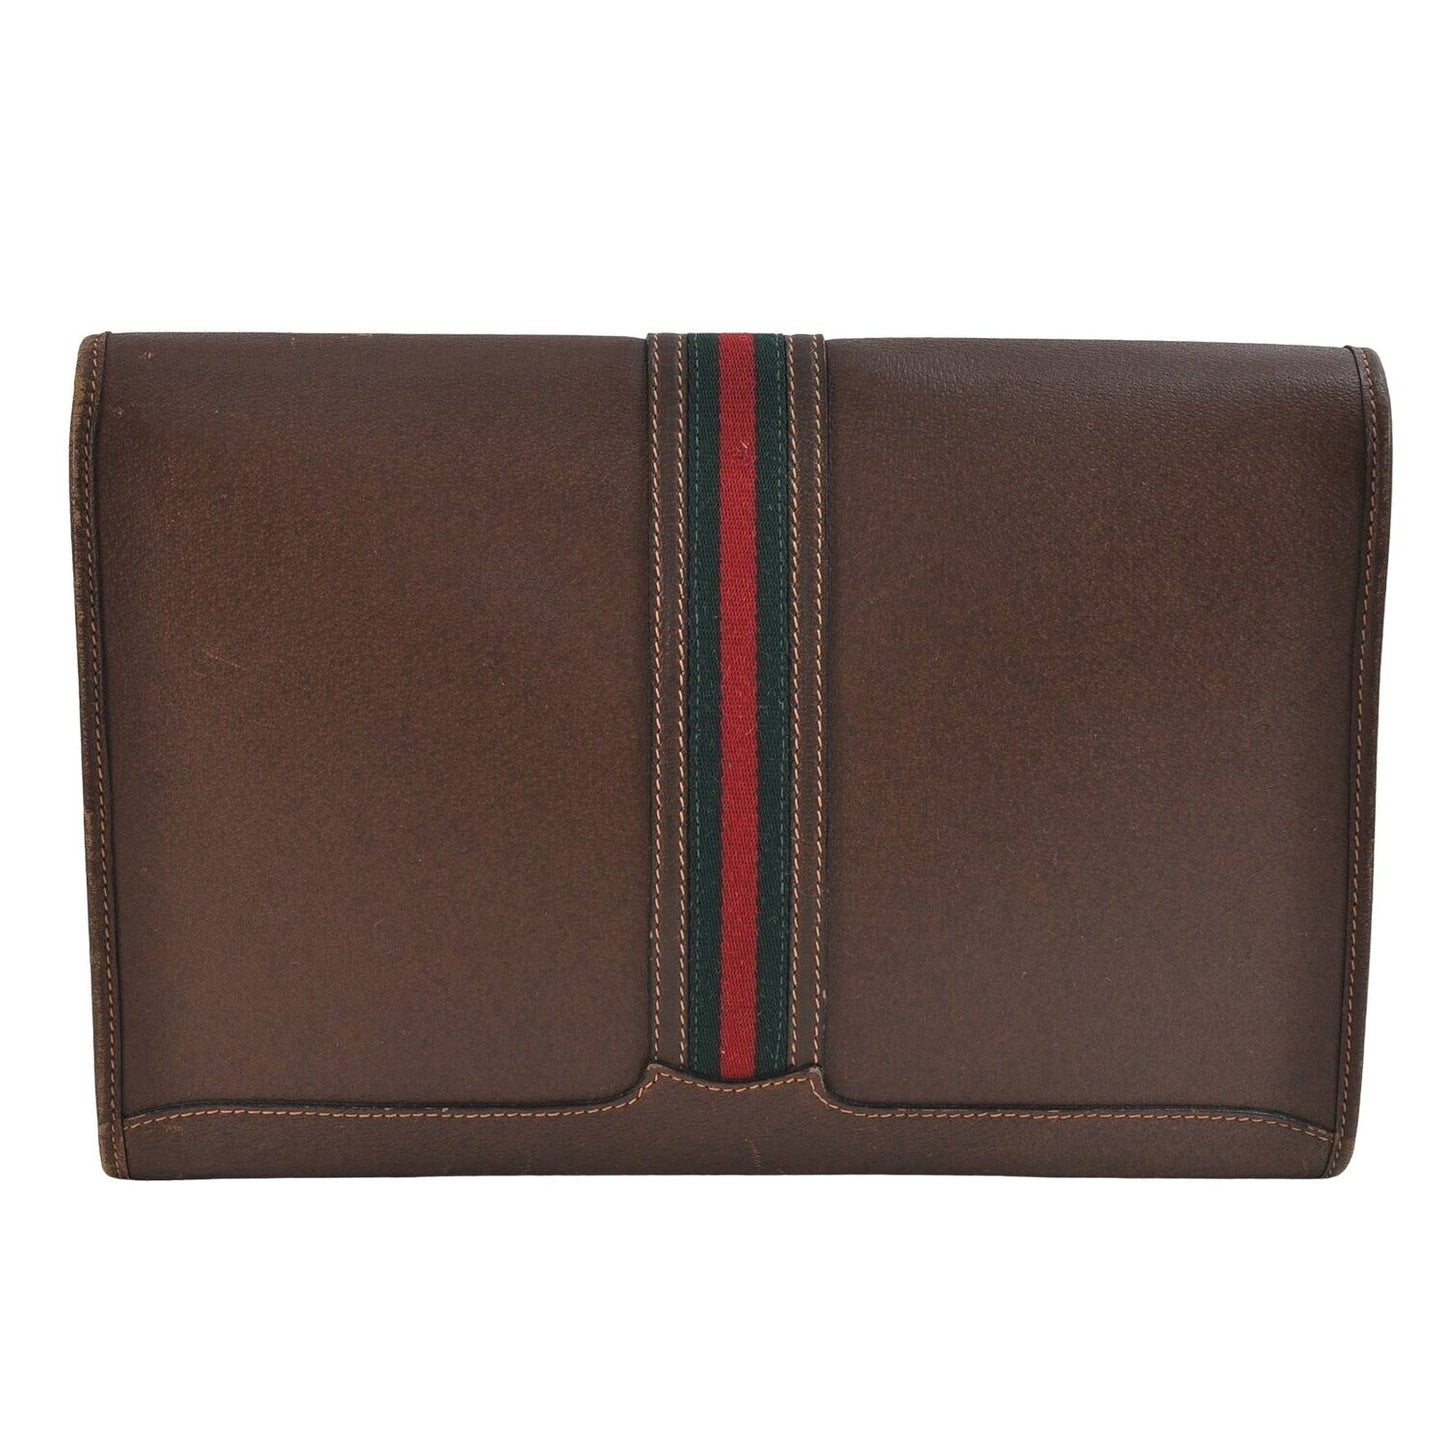 RARE, Gucci, Jackie, mod, brown leather, boxy, clutch or portfolio with a red & green stripe, a flap strap closure at the center